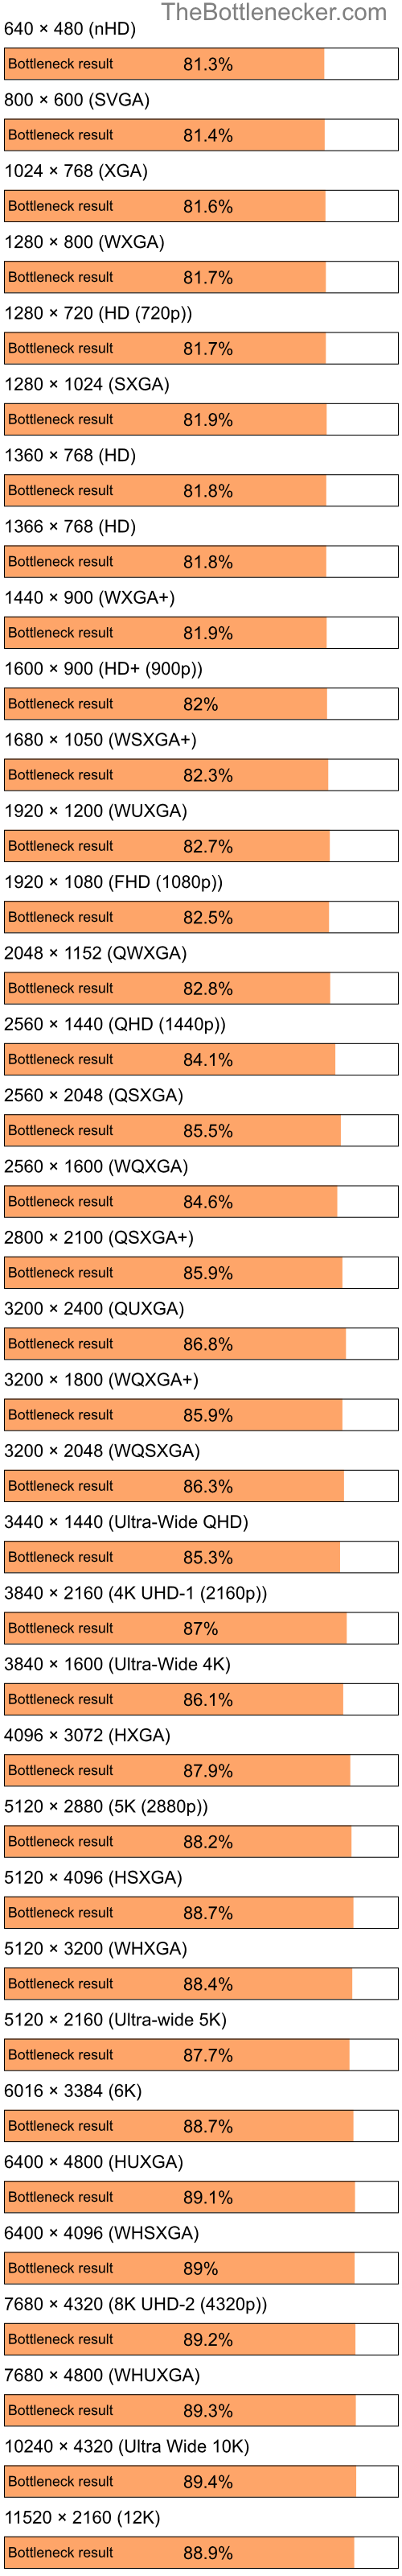 Bottleneck results by resolution for Intel Celeron M 410 and NVIDIA nForce 630a in Graphic Card Intense Tasks